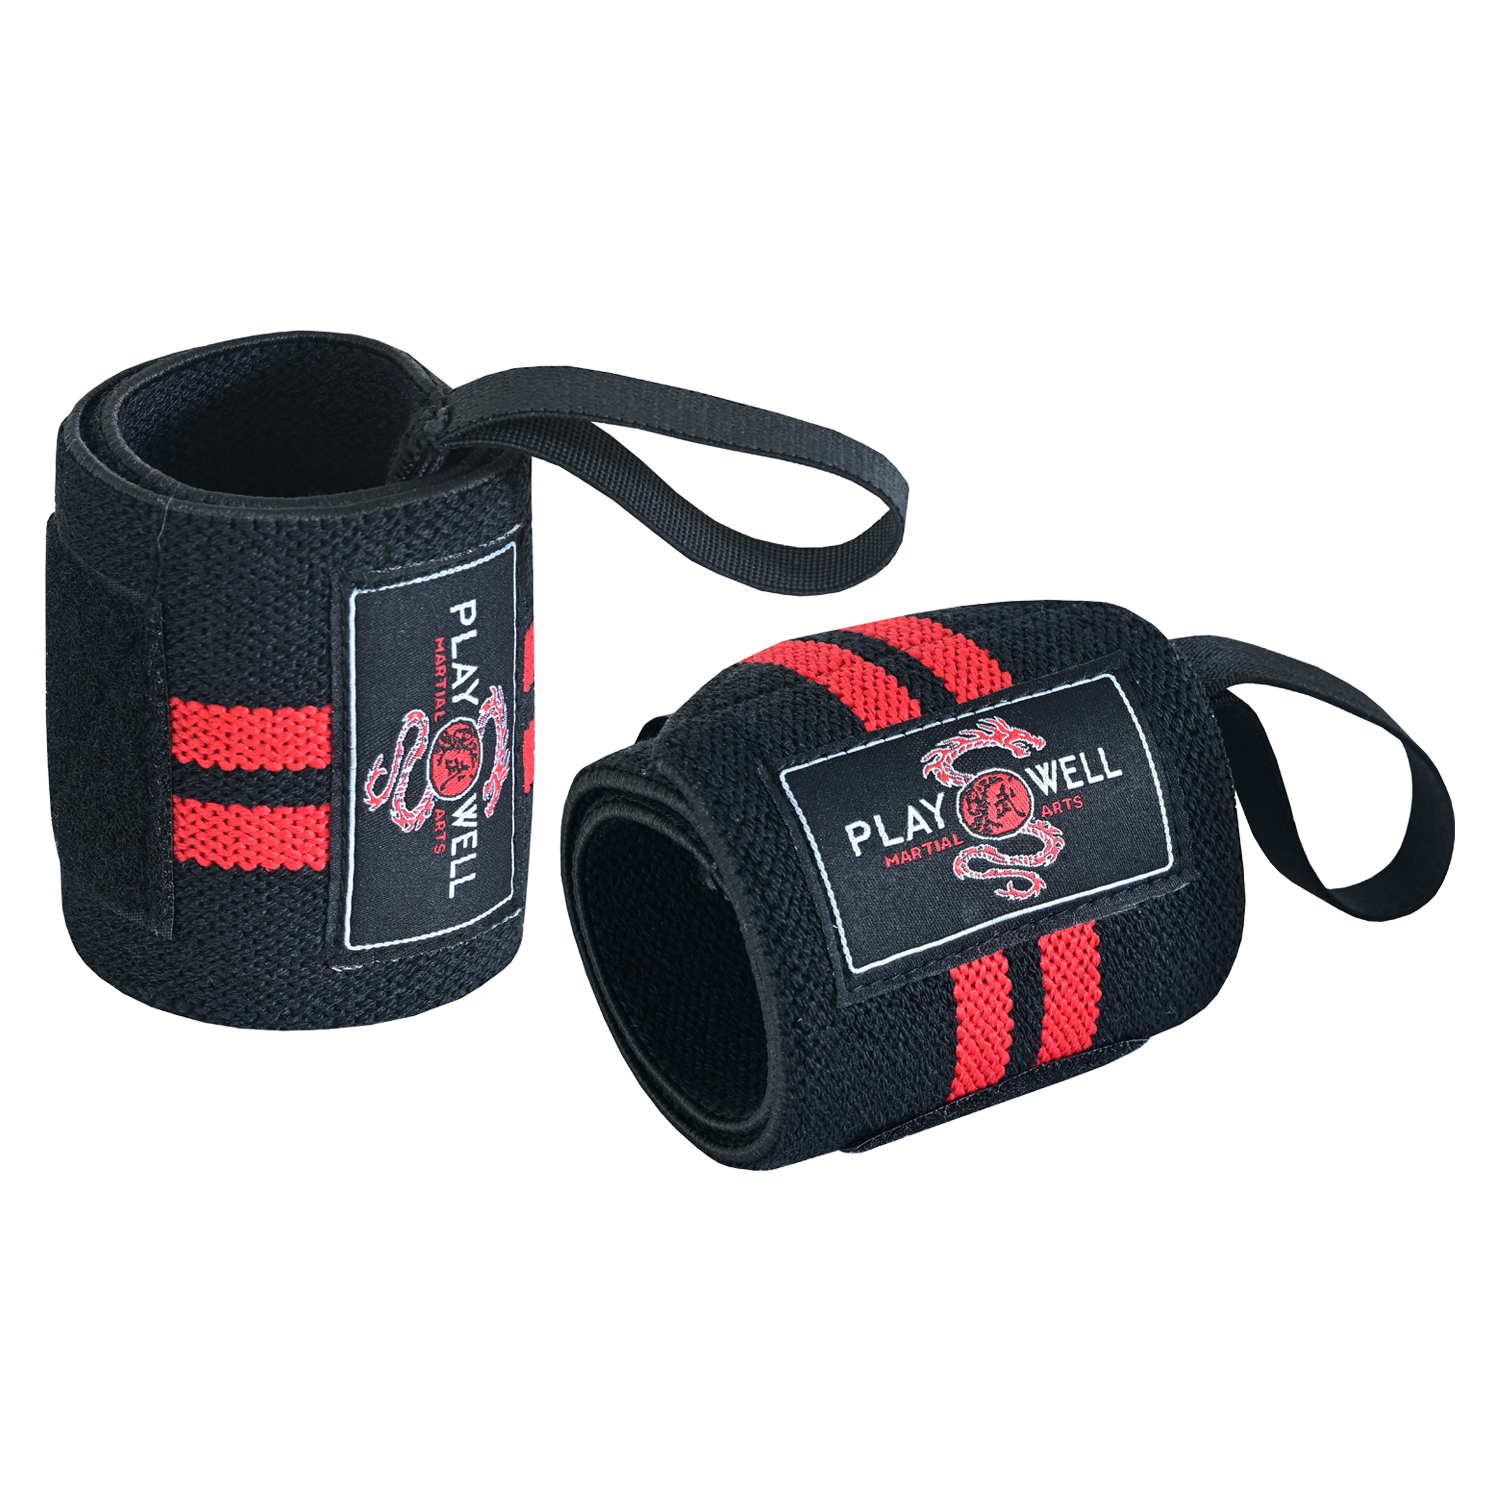 Pro Weight Training Range: Weight Lifting Wrist Support Straps - Click Image to Close